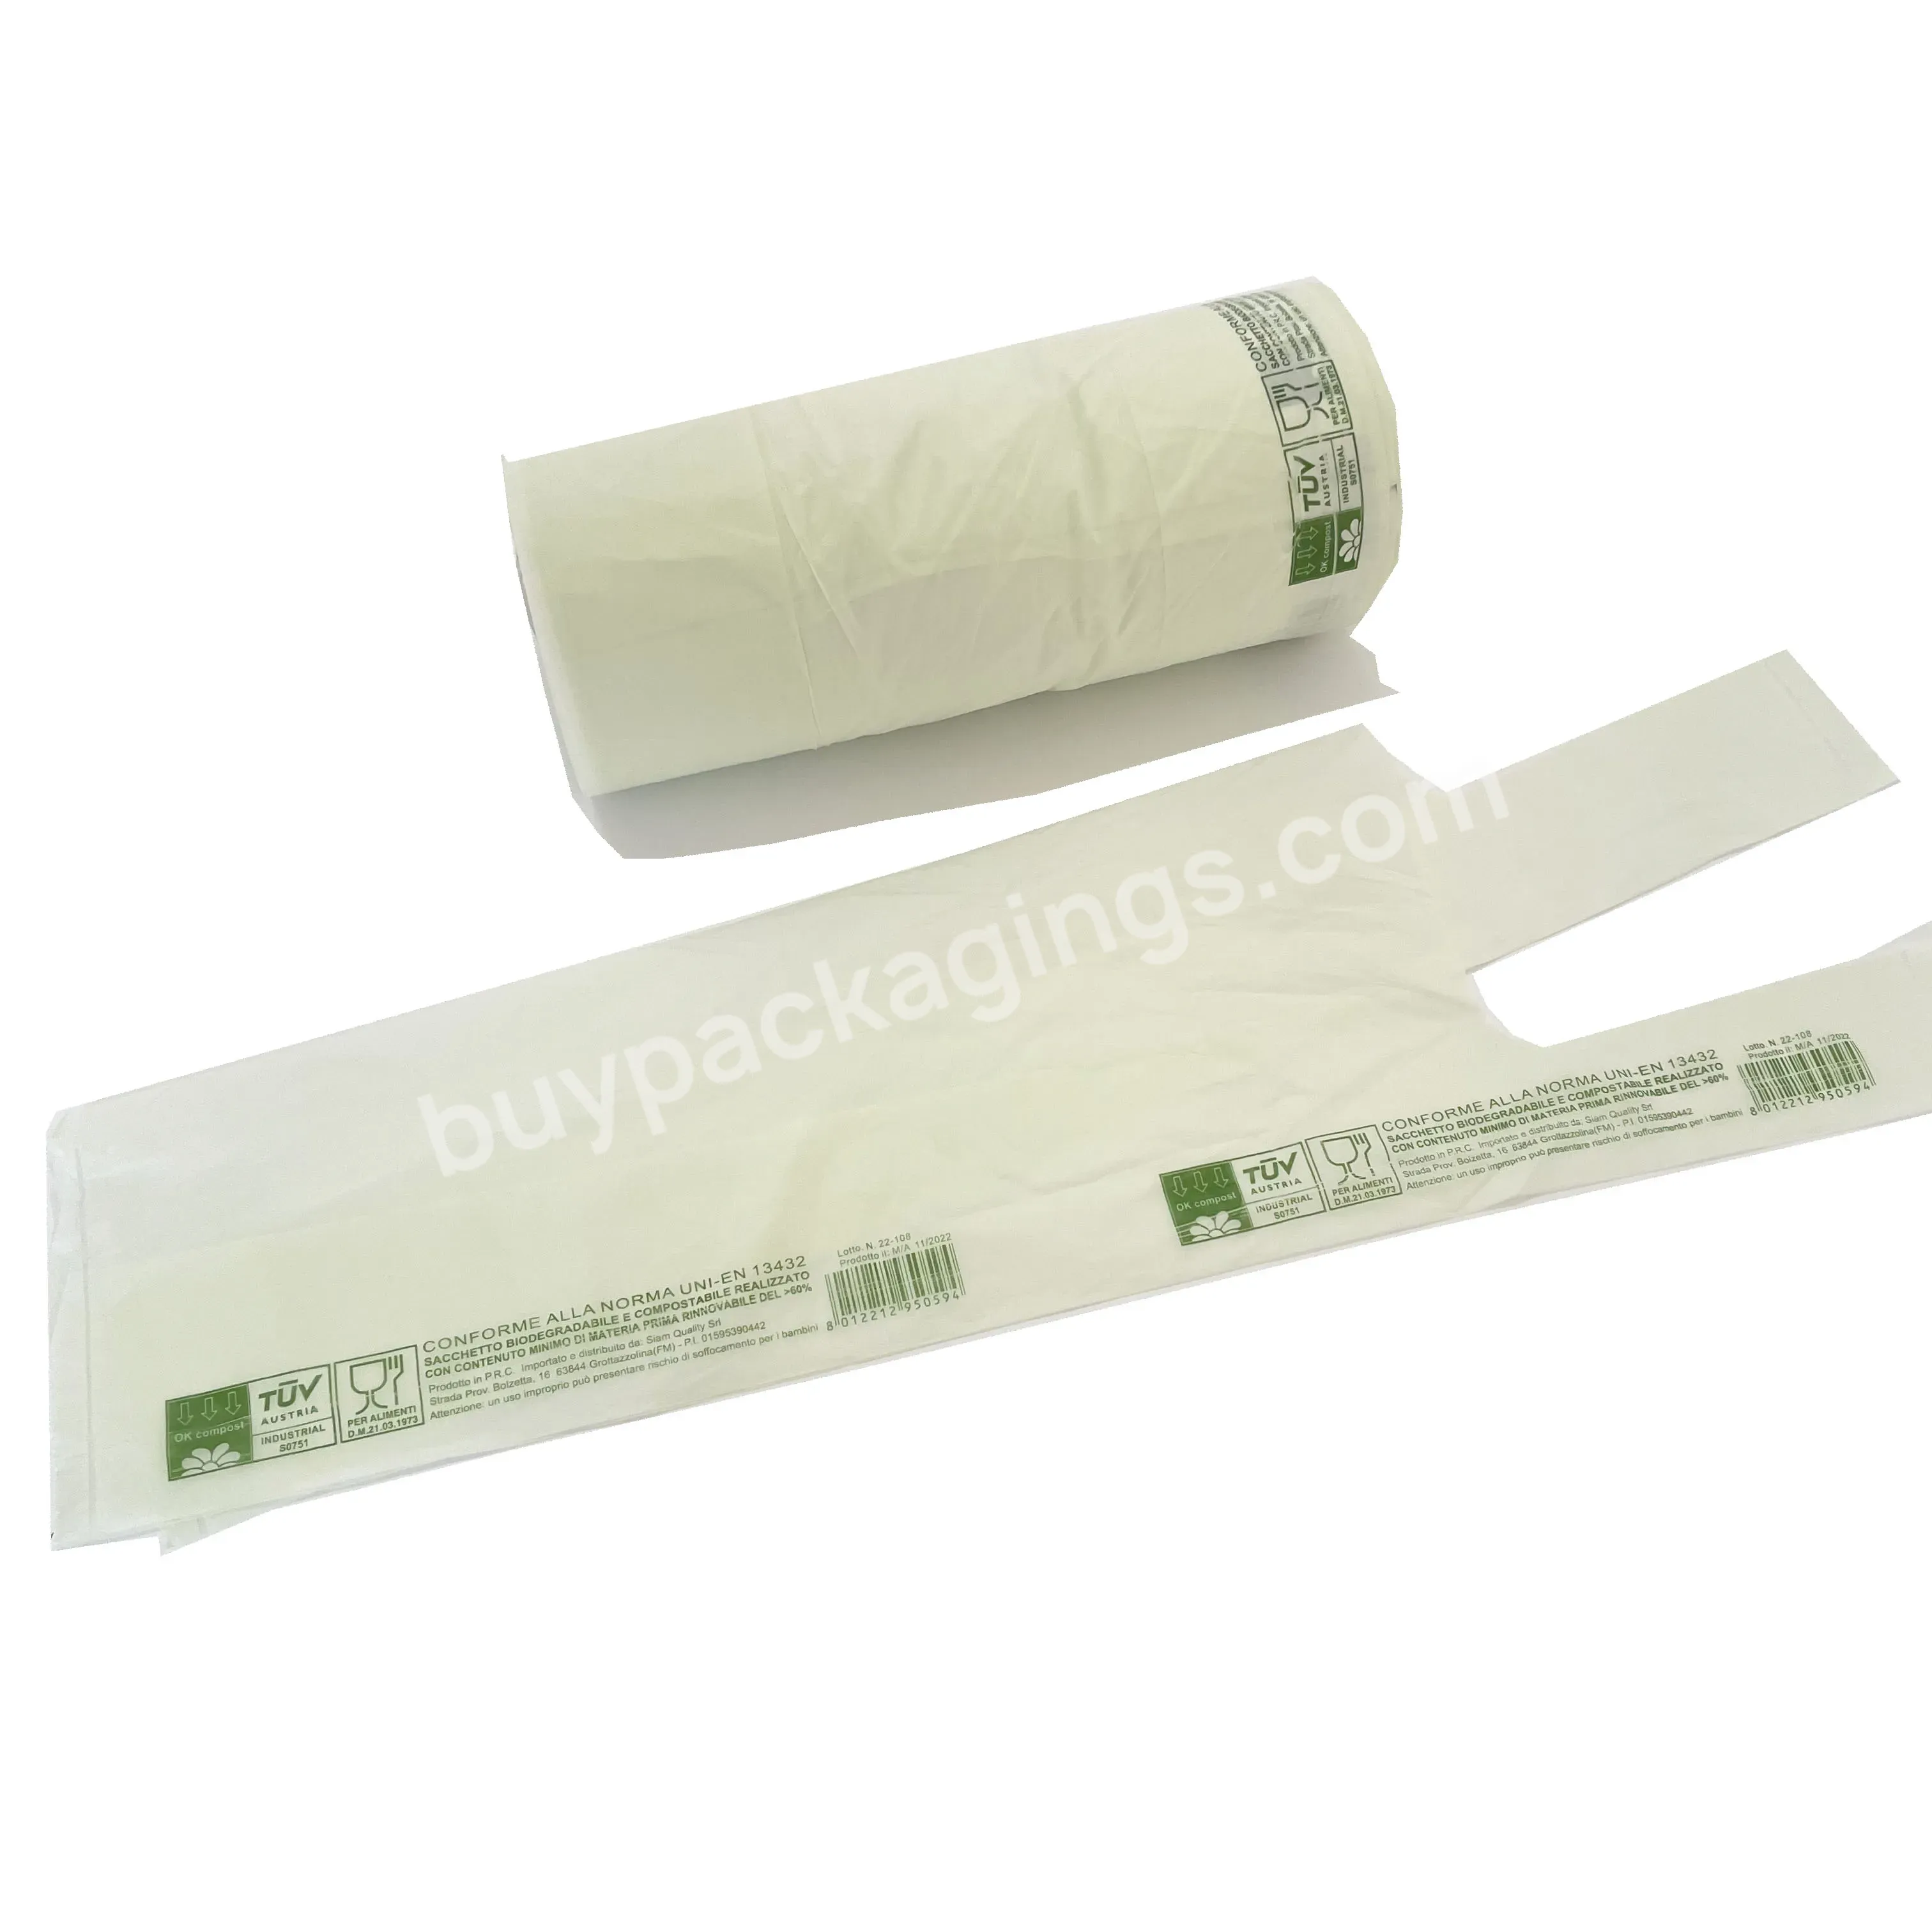 Biodegradable Edible Packaging Compostable Bag Grocery Shopping Plastic Bags For Supermarket